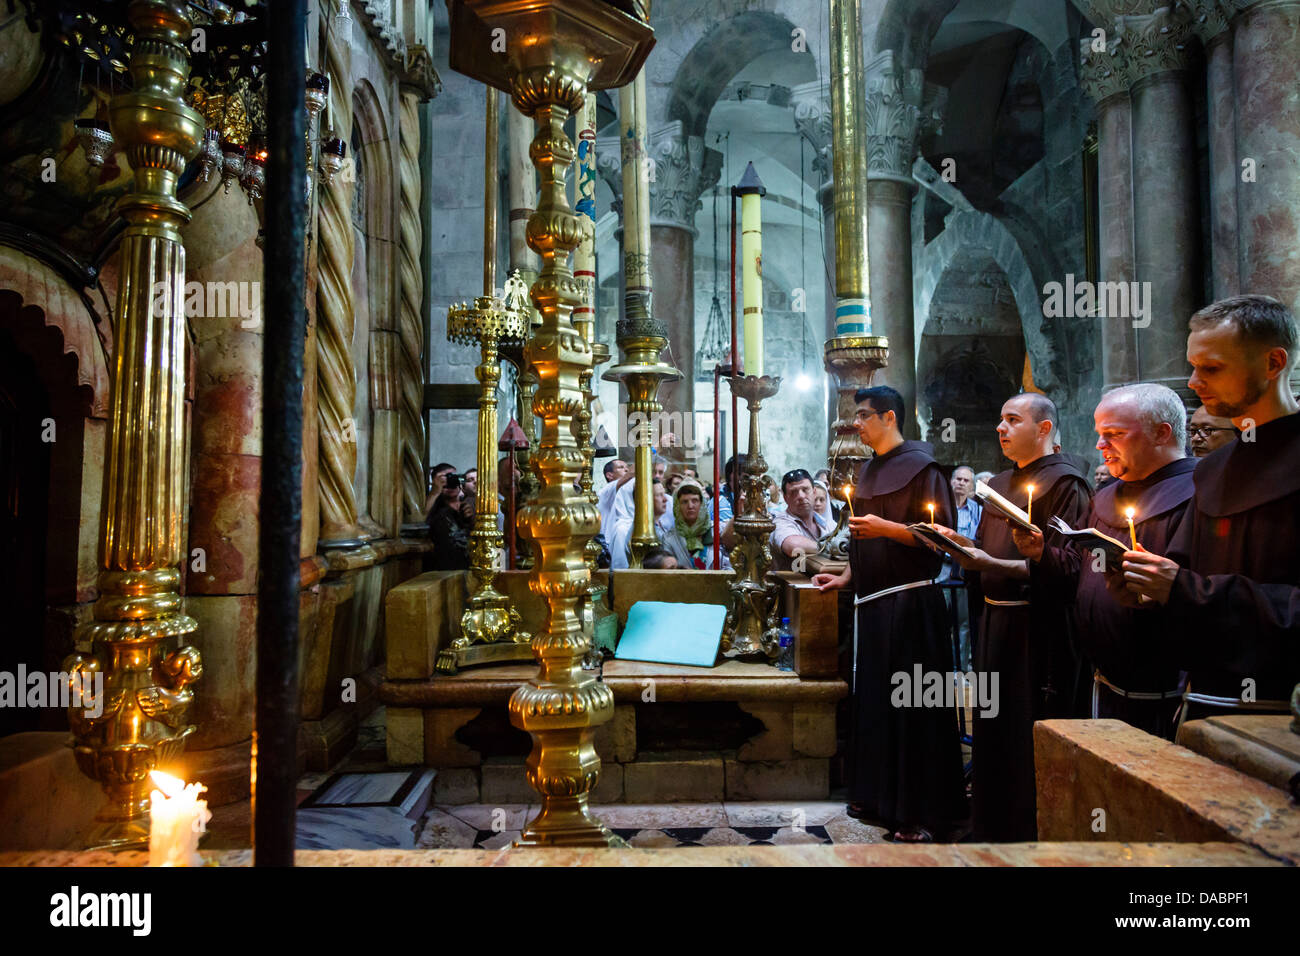 Franciscan monks at the Church of the Holy Sepulchre in the Old City, Jerusalem, Israel, Middle East Stock Photo